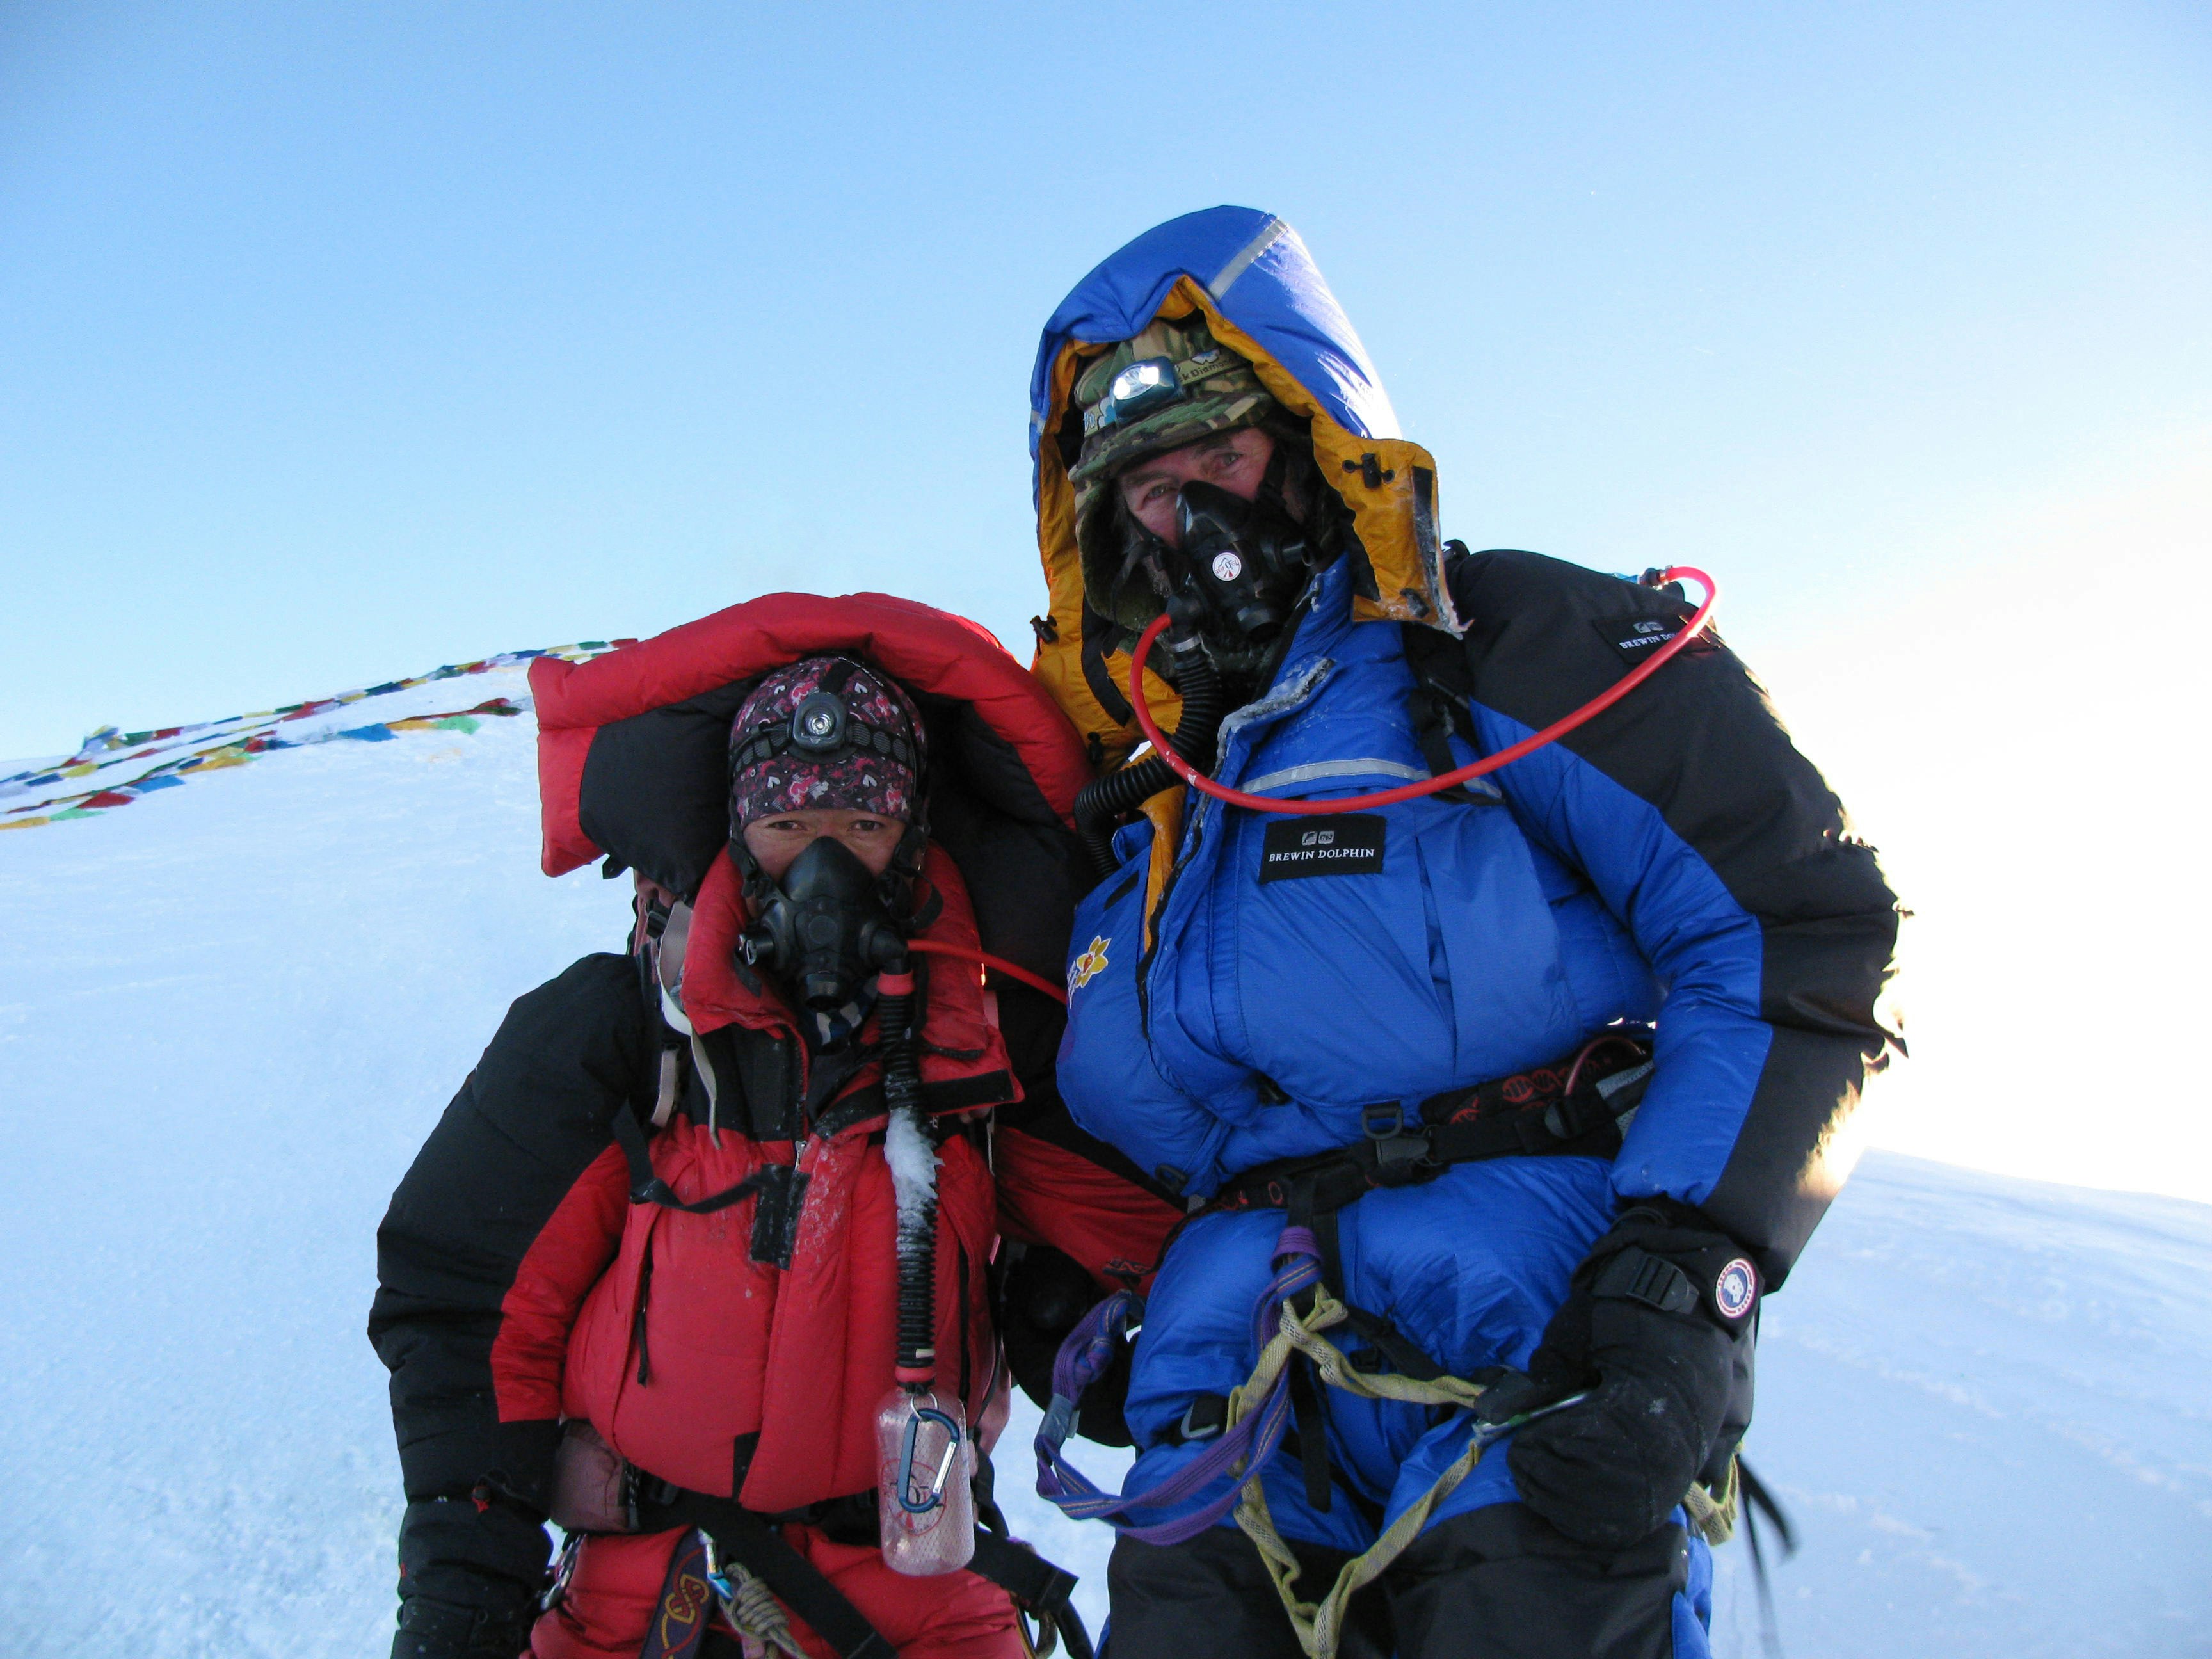 Sir Ran and his short Sherpa guide standing at the summit of Mt Everest; both are wearing oxygen masks and huge down jackets.